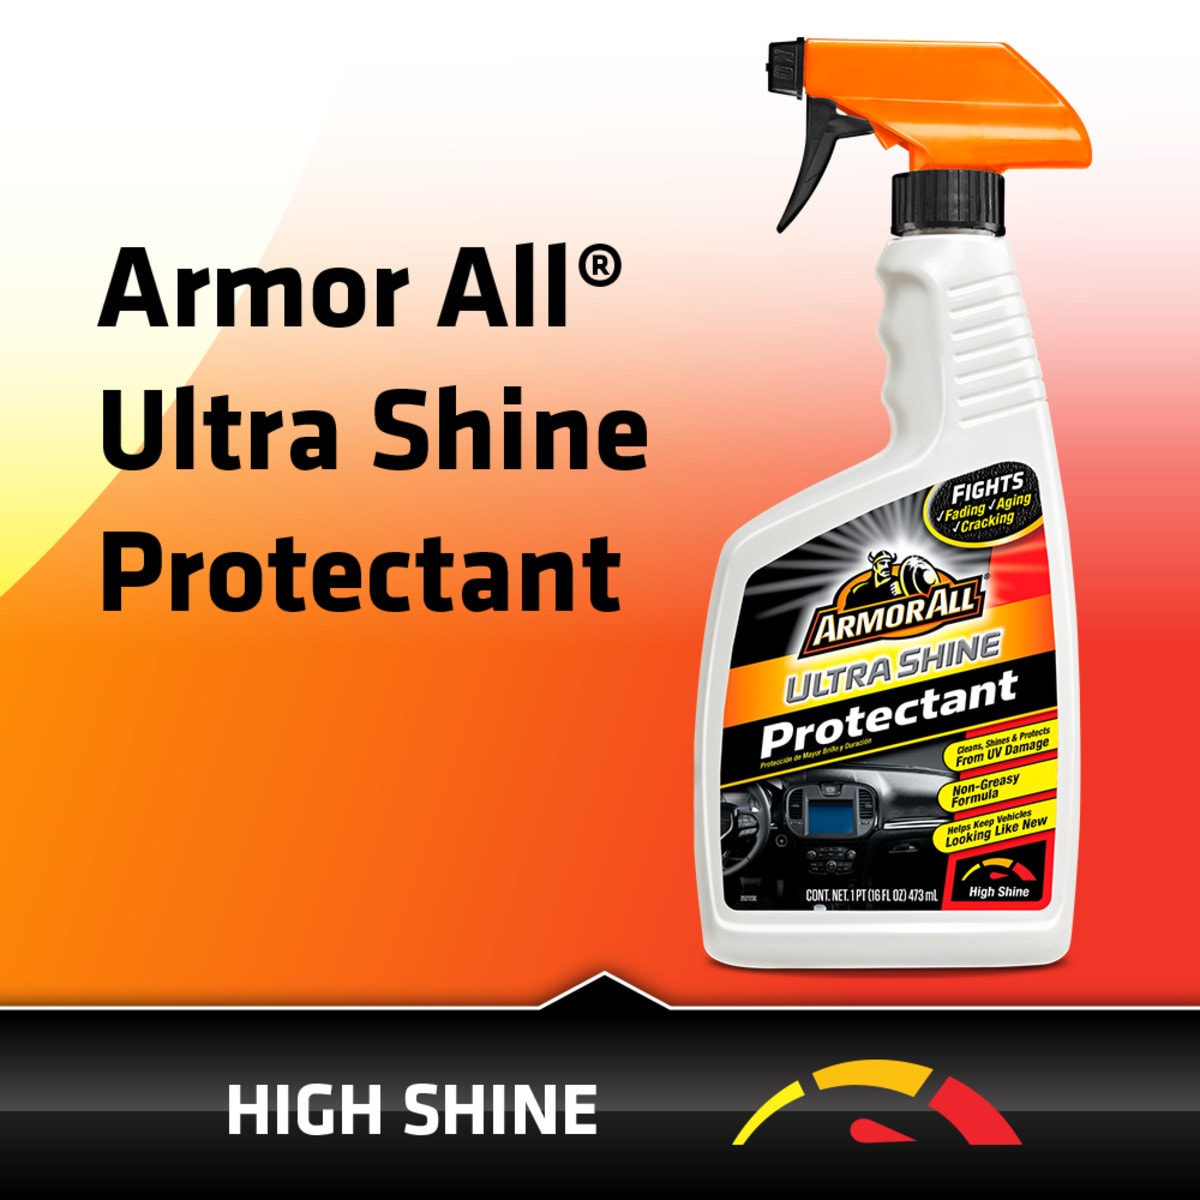 Armor All Protectant Spray Review - Garage Dreams